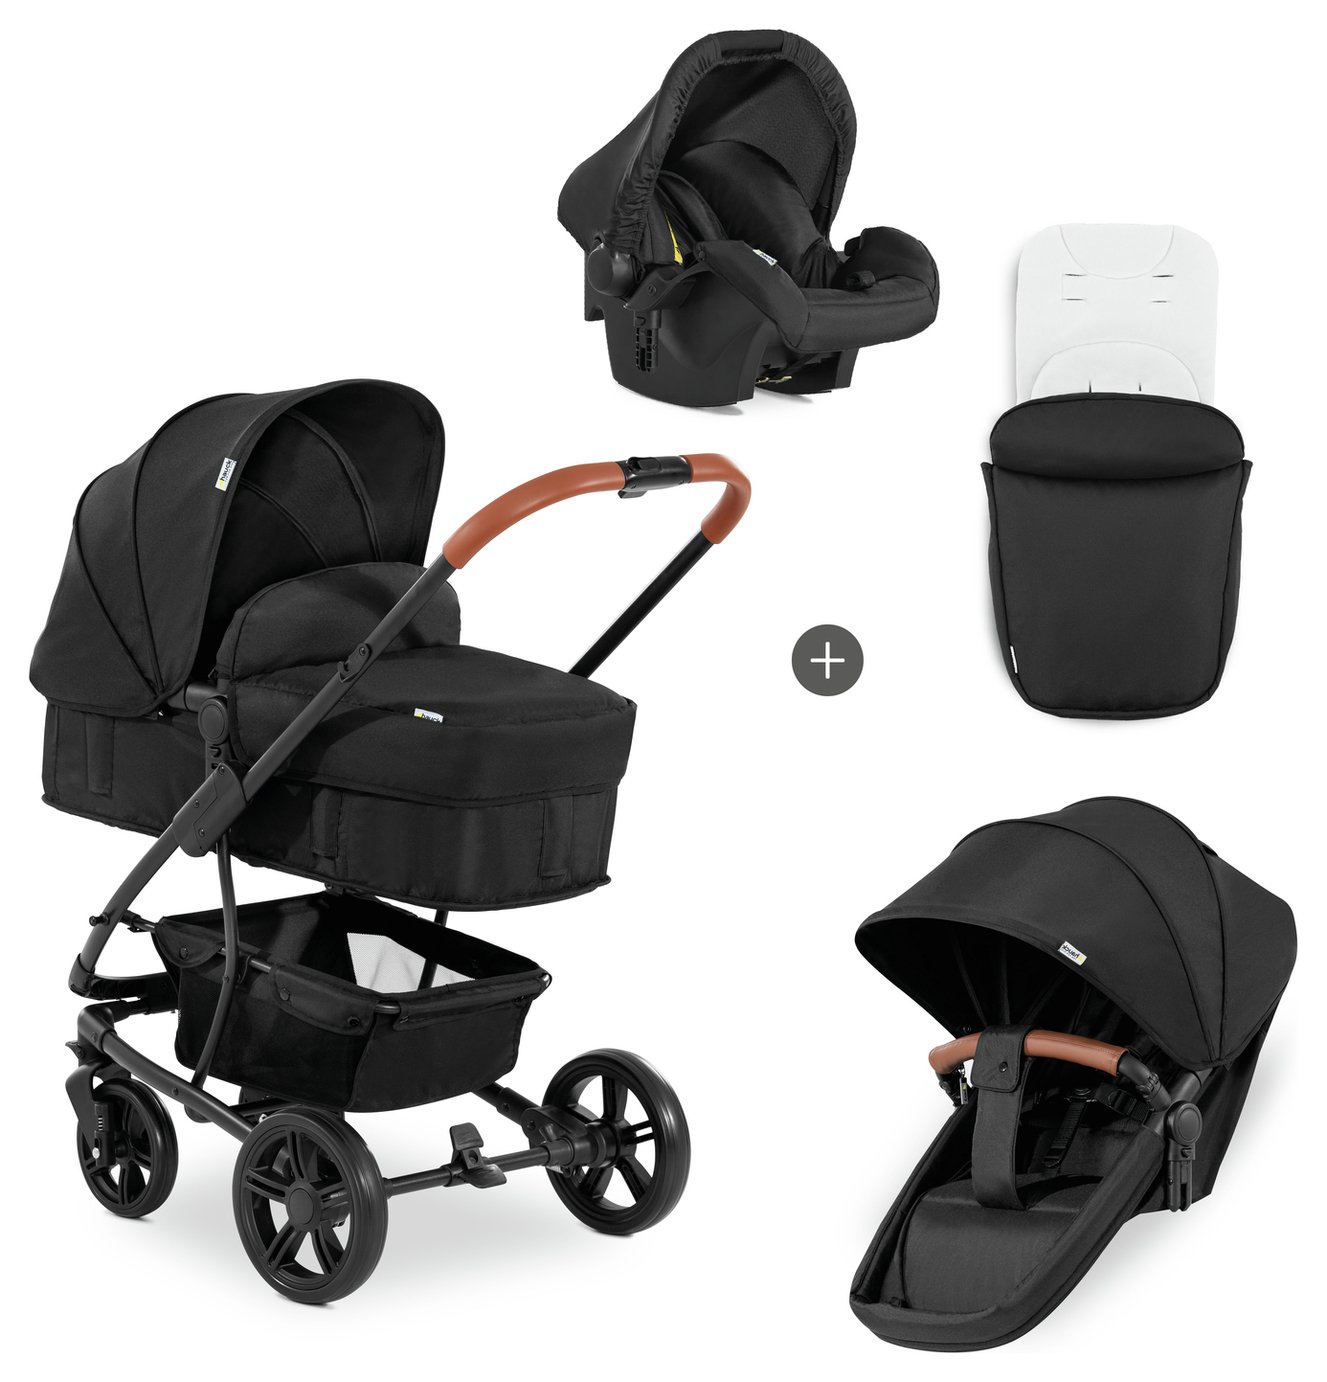 Hauck Pacific 4 Travel System - Black